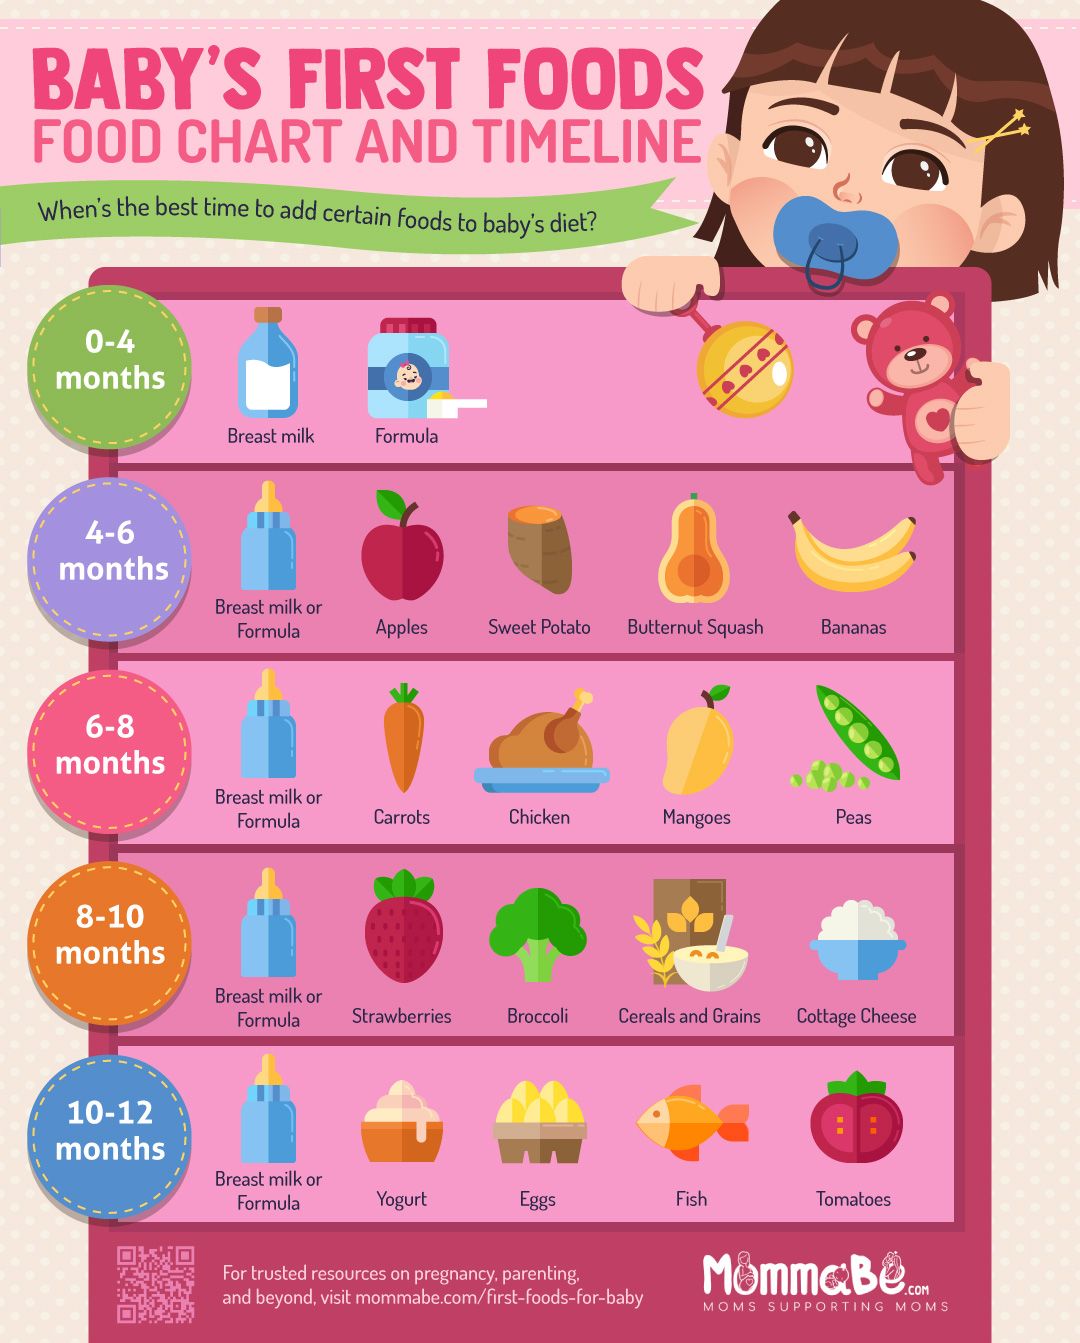 9 Healthiest First Foods for Baby + Recipes [INFOGRAPHIC] | mominthesix